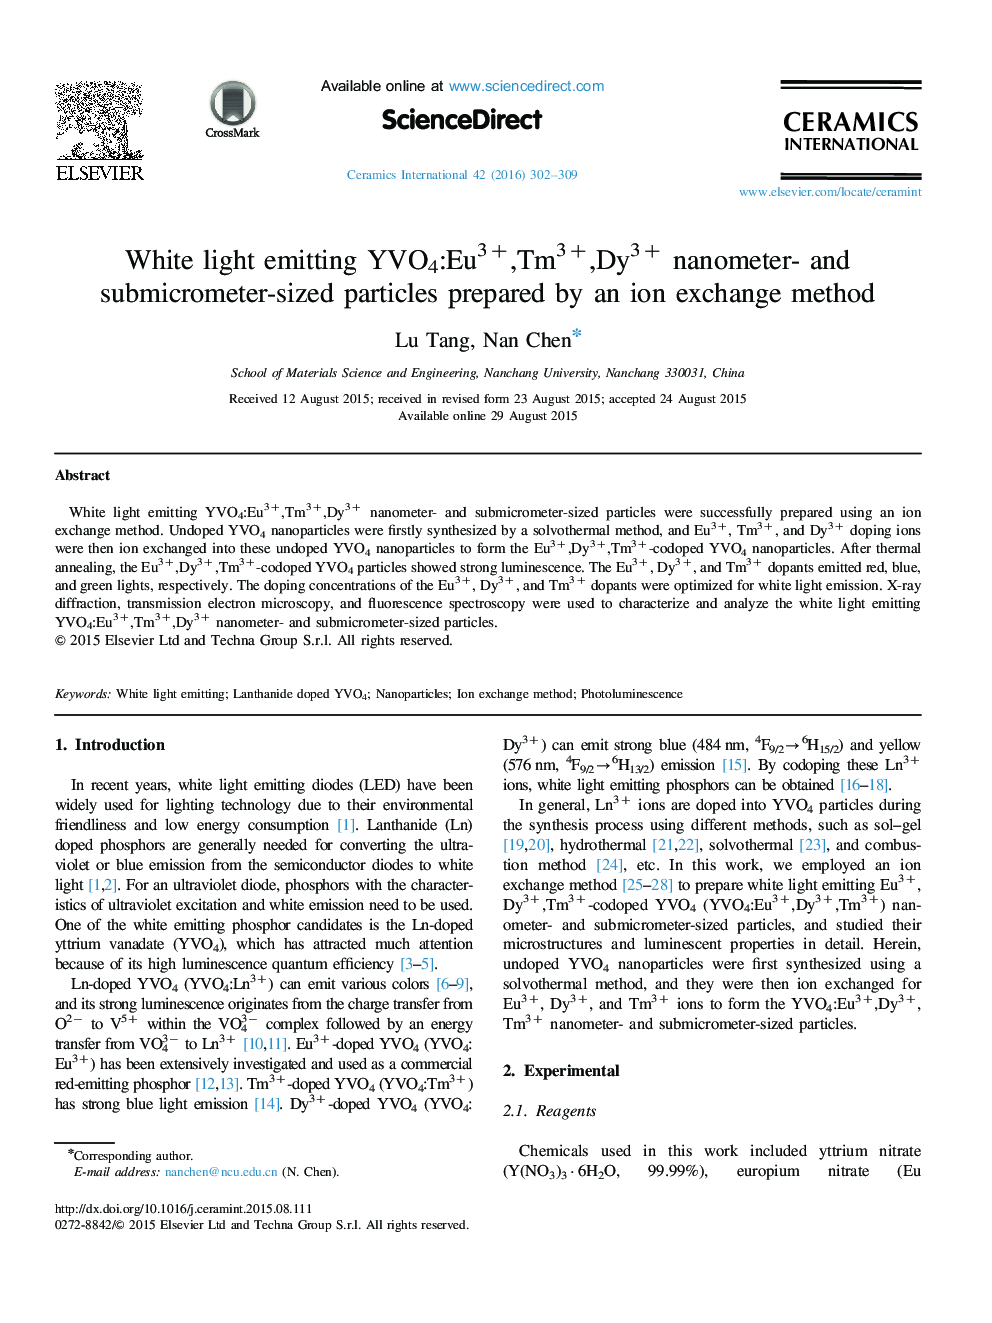 White light emitting YVO4:Eu3+,Tm3+,Dy3+ nanometer- and submicrometer-sized particles prepared by an ion exchange method